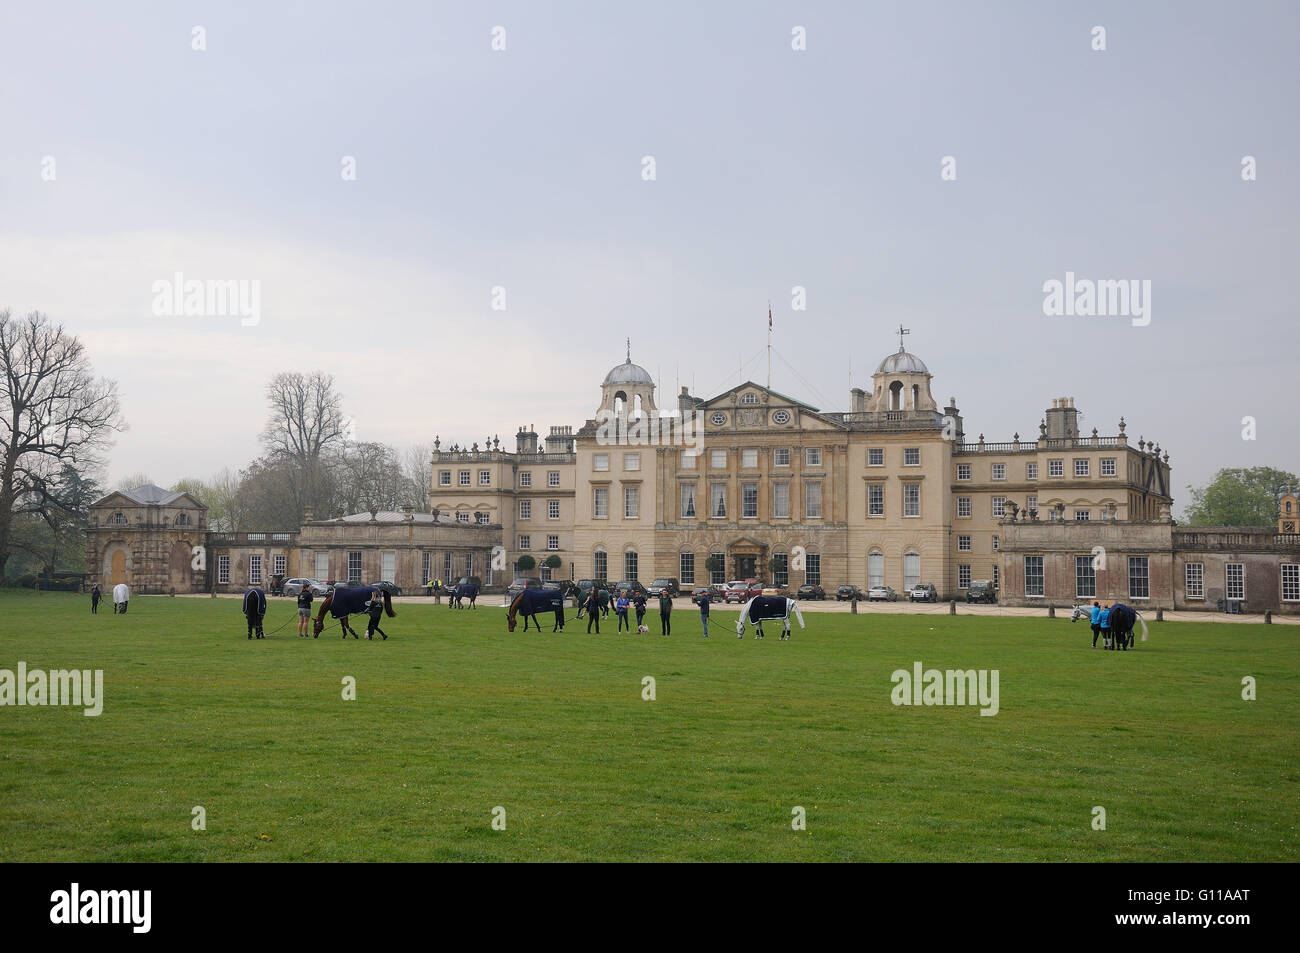 Badminton, UK. 07th May, 2016. The 2016 Mitsubishi Motors Badminton Horse Trials. Horses grazing in front of Badminton House ahead of the Cross Country Phase on Day 3 of the Mitsubishi Motors Badminton Horse Trials which take place 5th - 8th May. Credit:  Jonathan Clarke/Alamy Live News Stock Photo